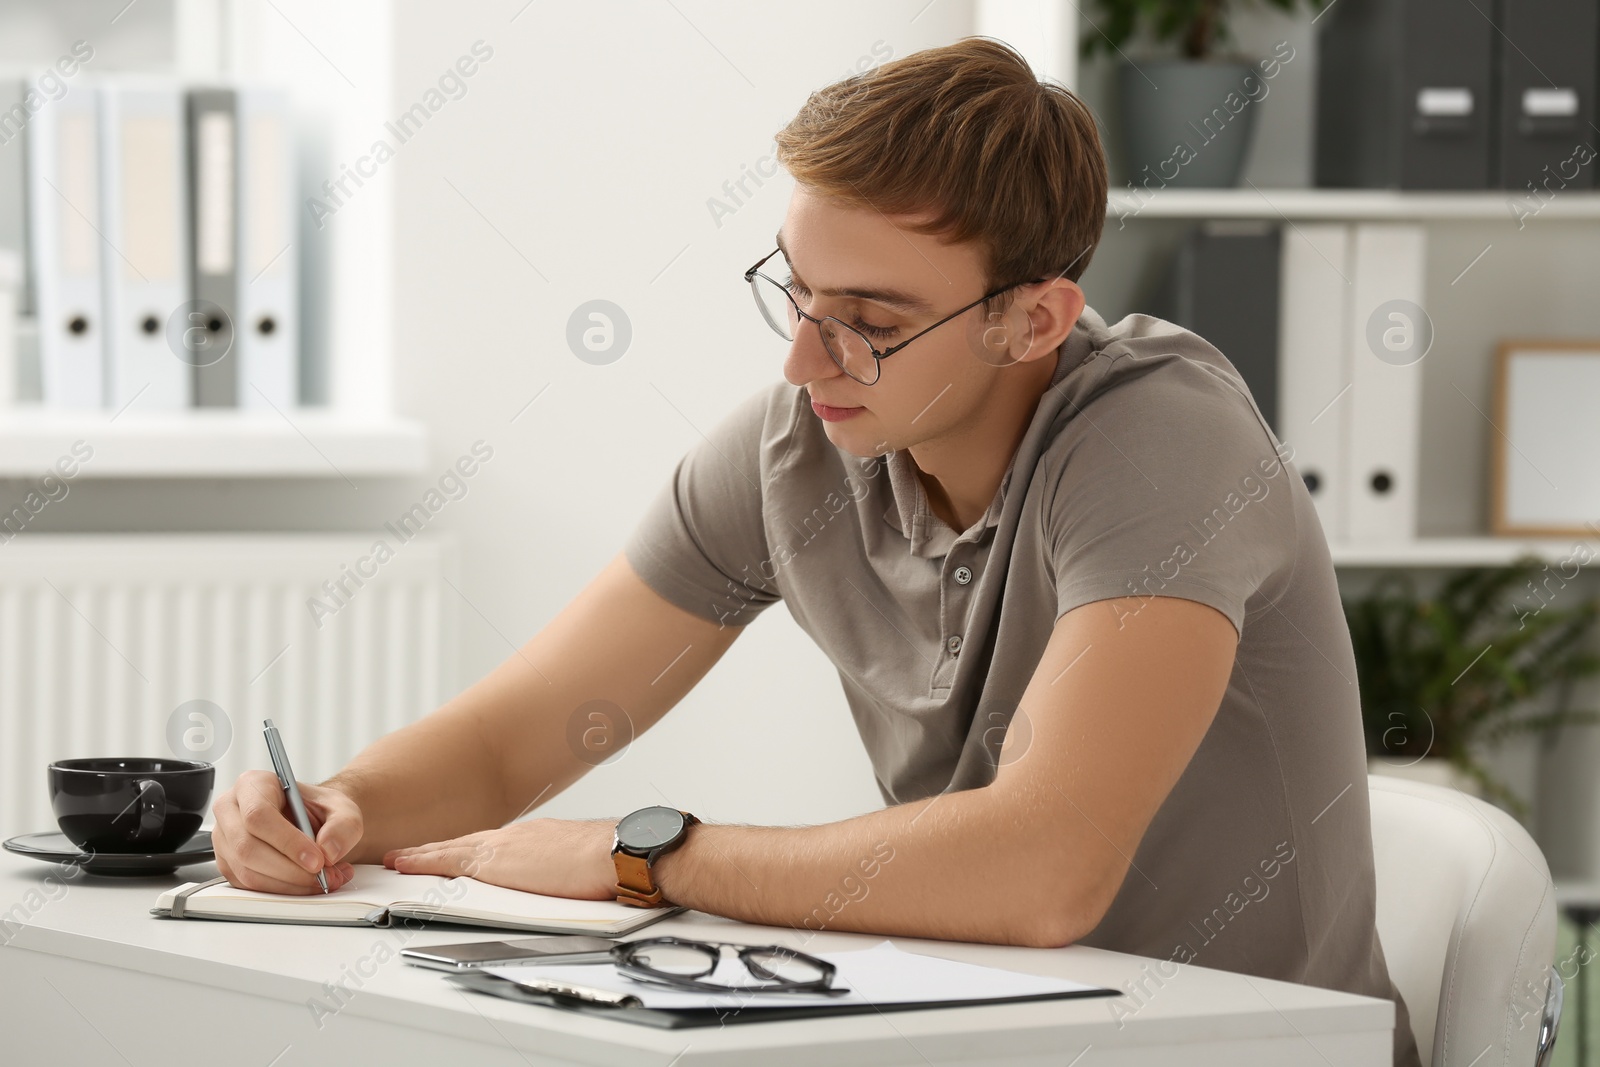 Photo of Young man writing in notebook at table indoors